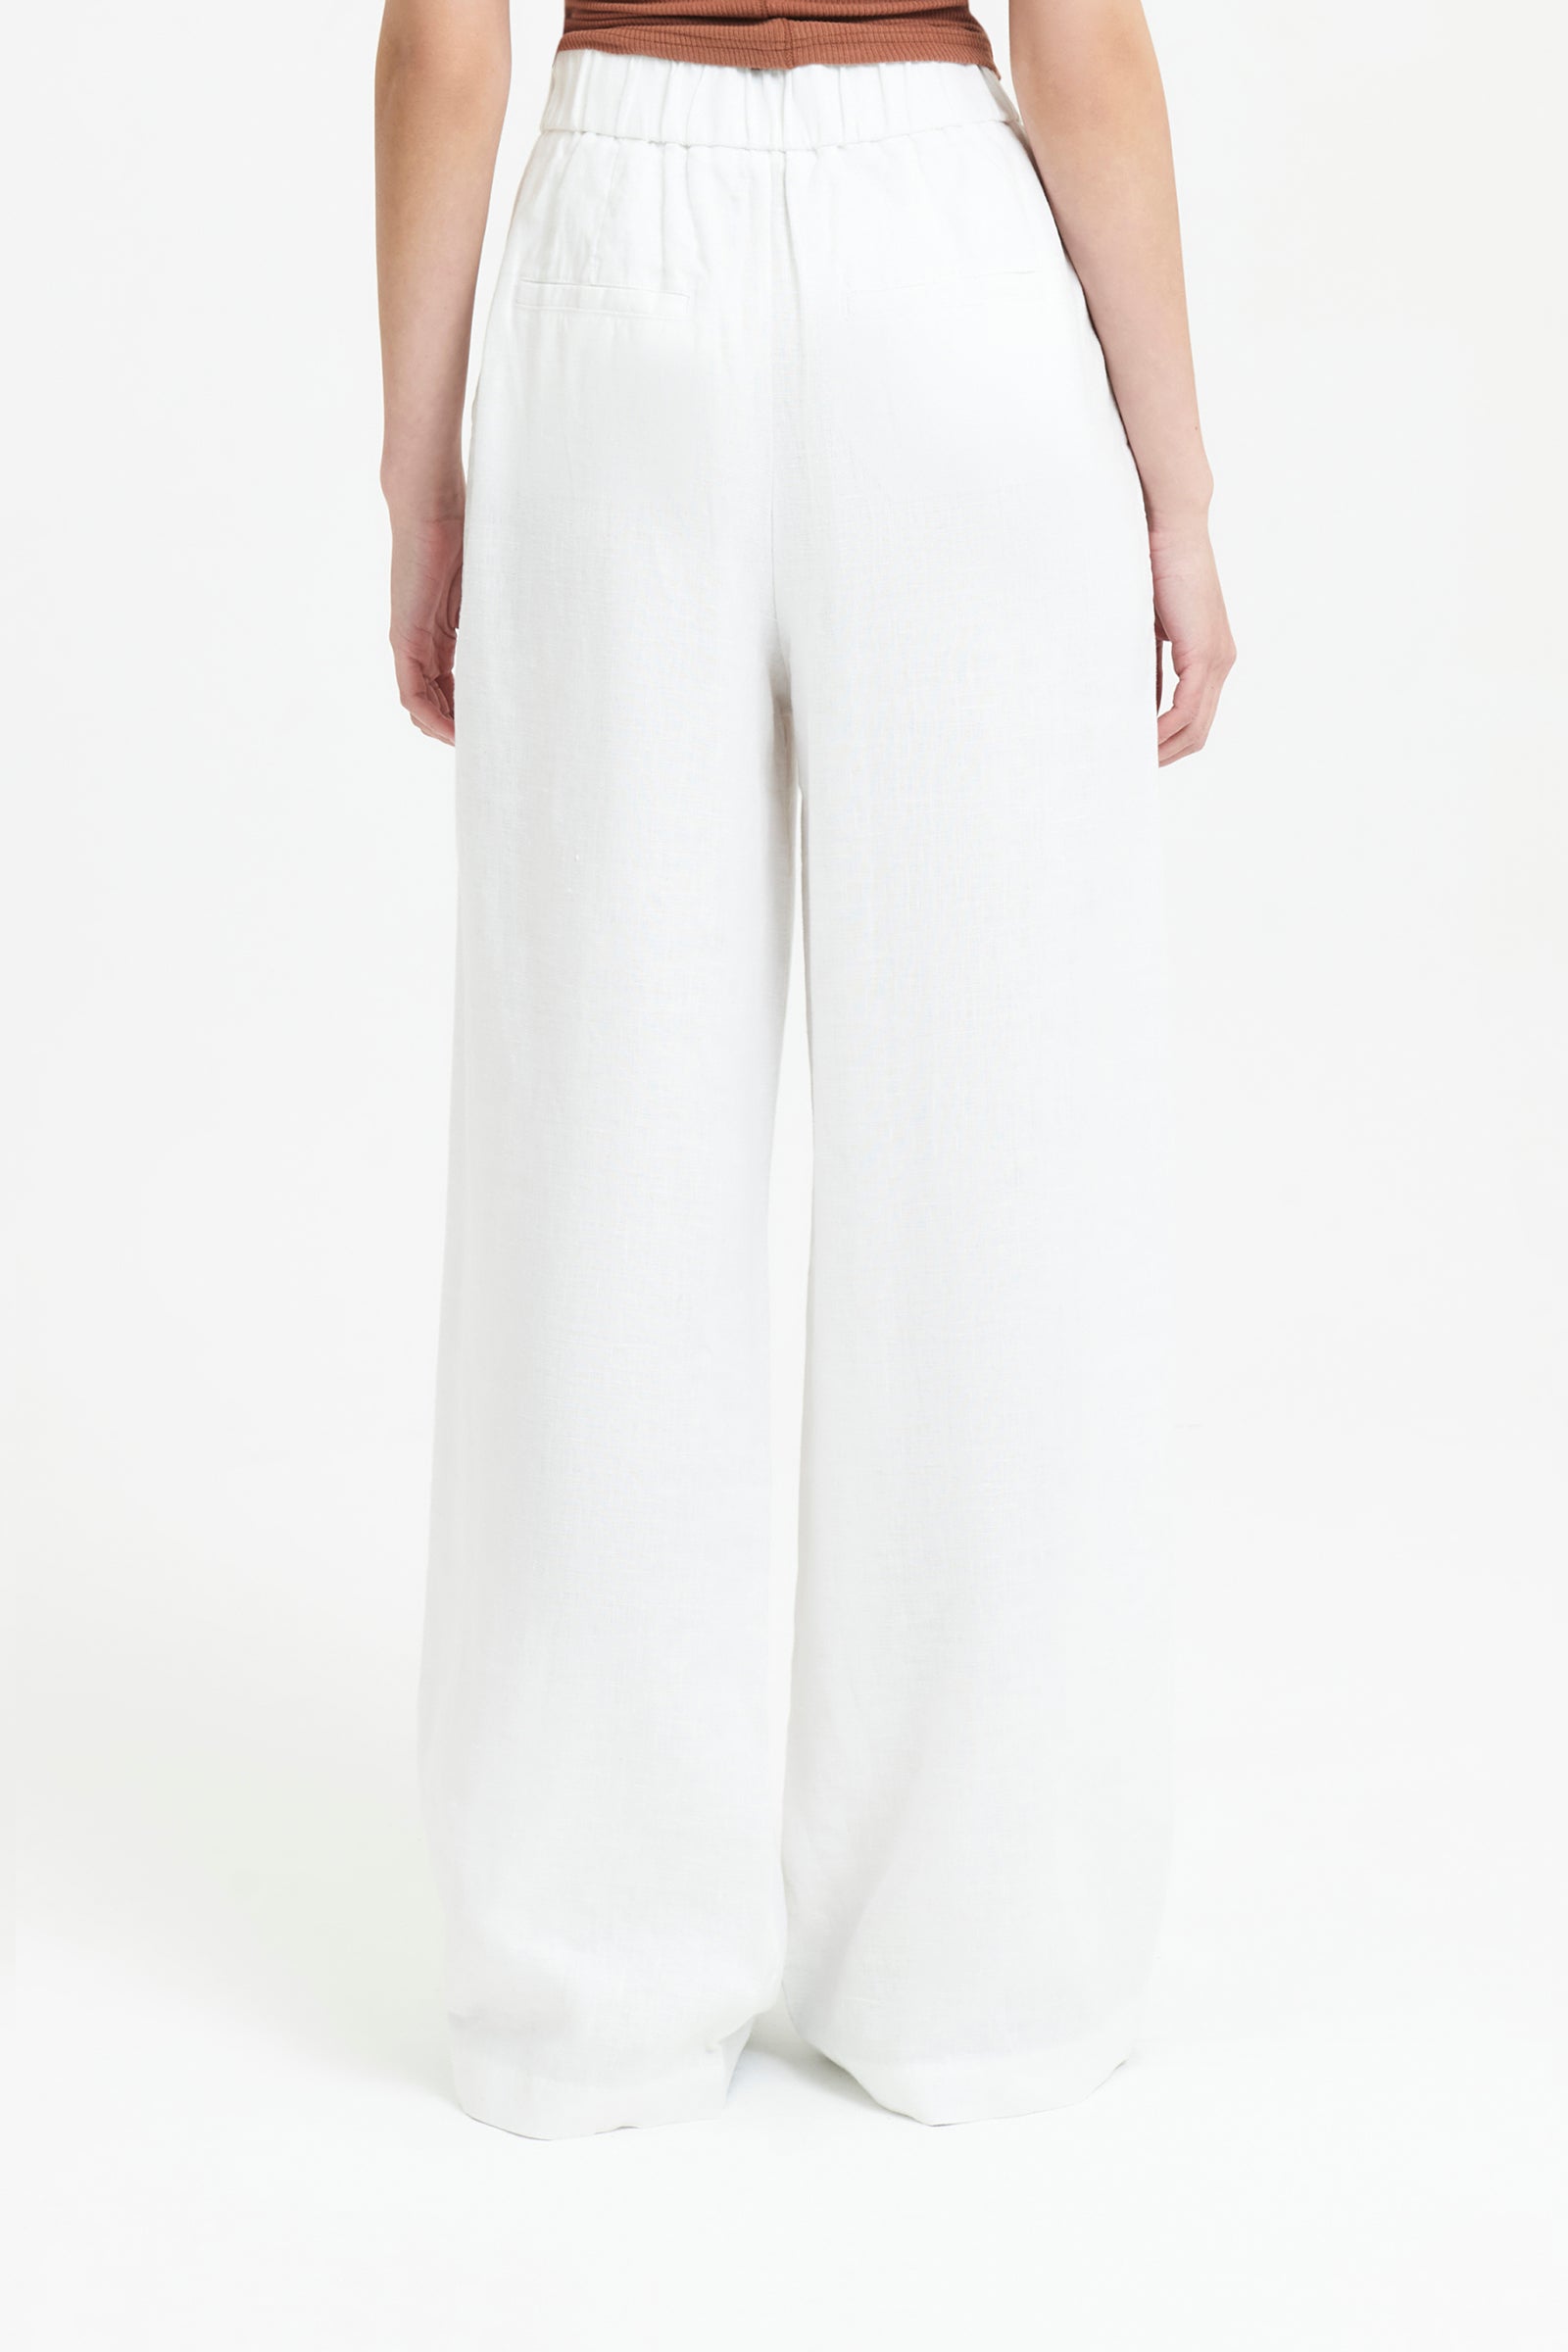 Nude Lucy Sima Linen Pant in White